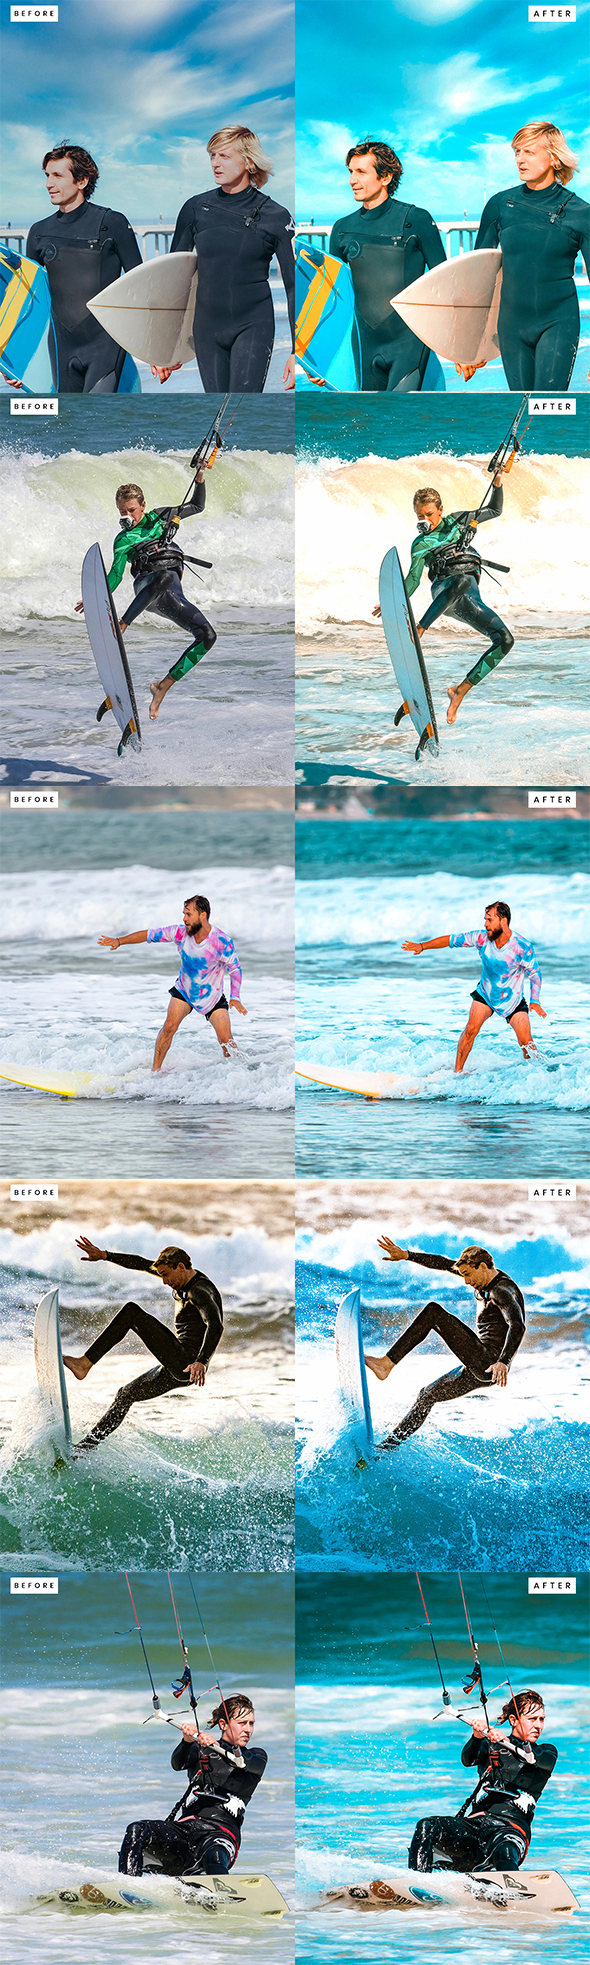 [DOWNLOAD]Surfer Photoshop Actions